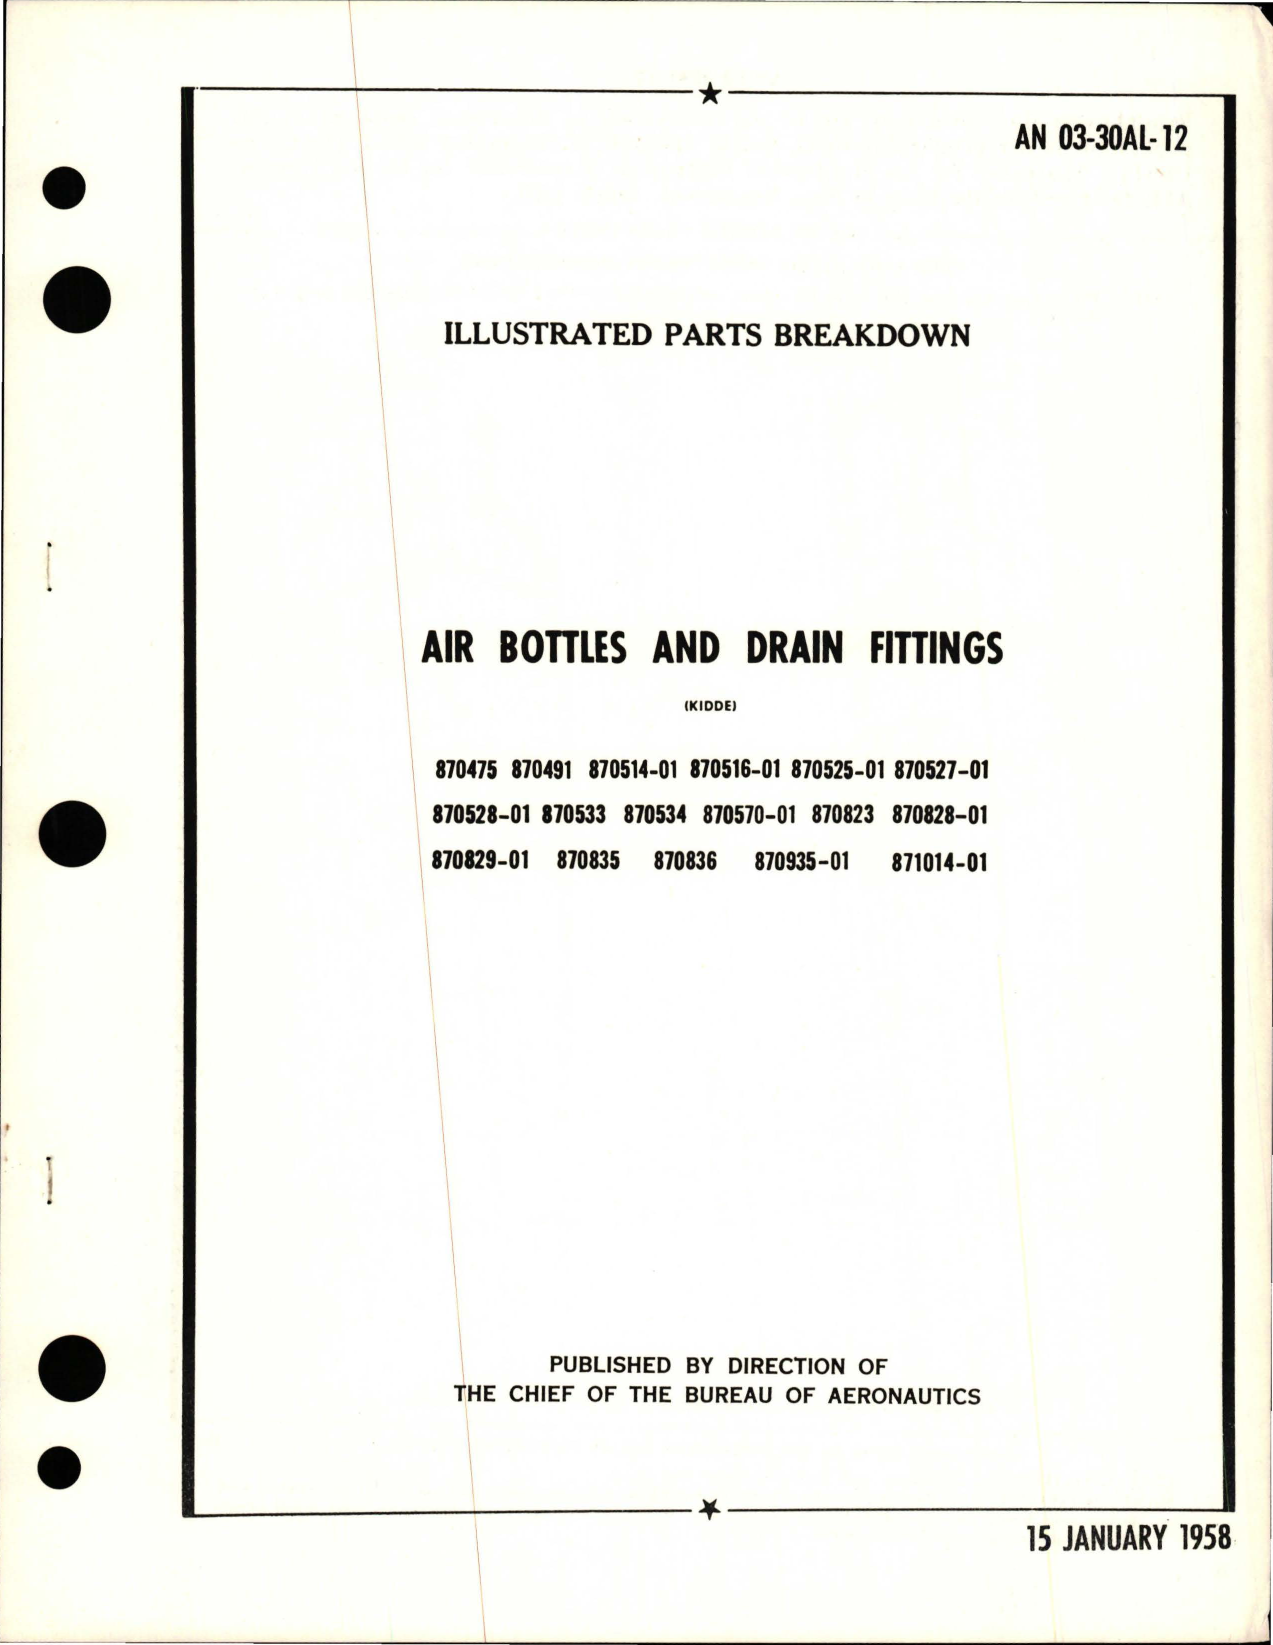 Sample page 1 from AirCorps Library document: Illustrated Parts Breakdown for Air Bottles and Drain Fittings 